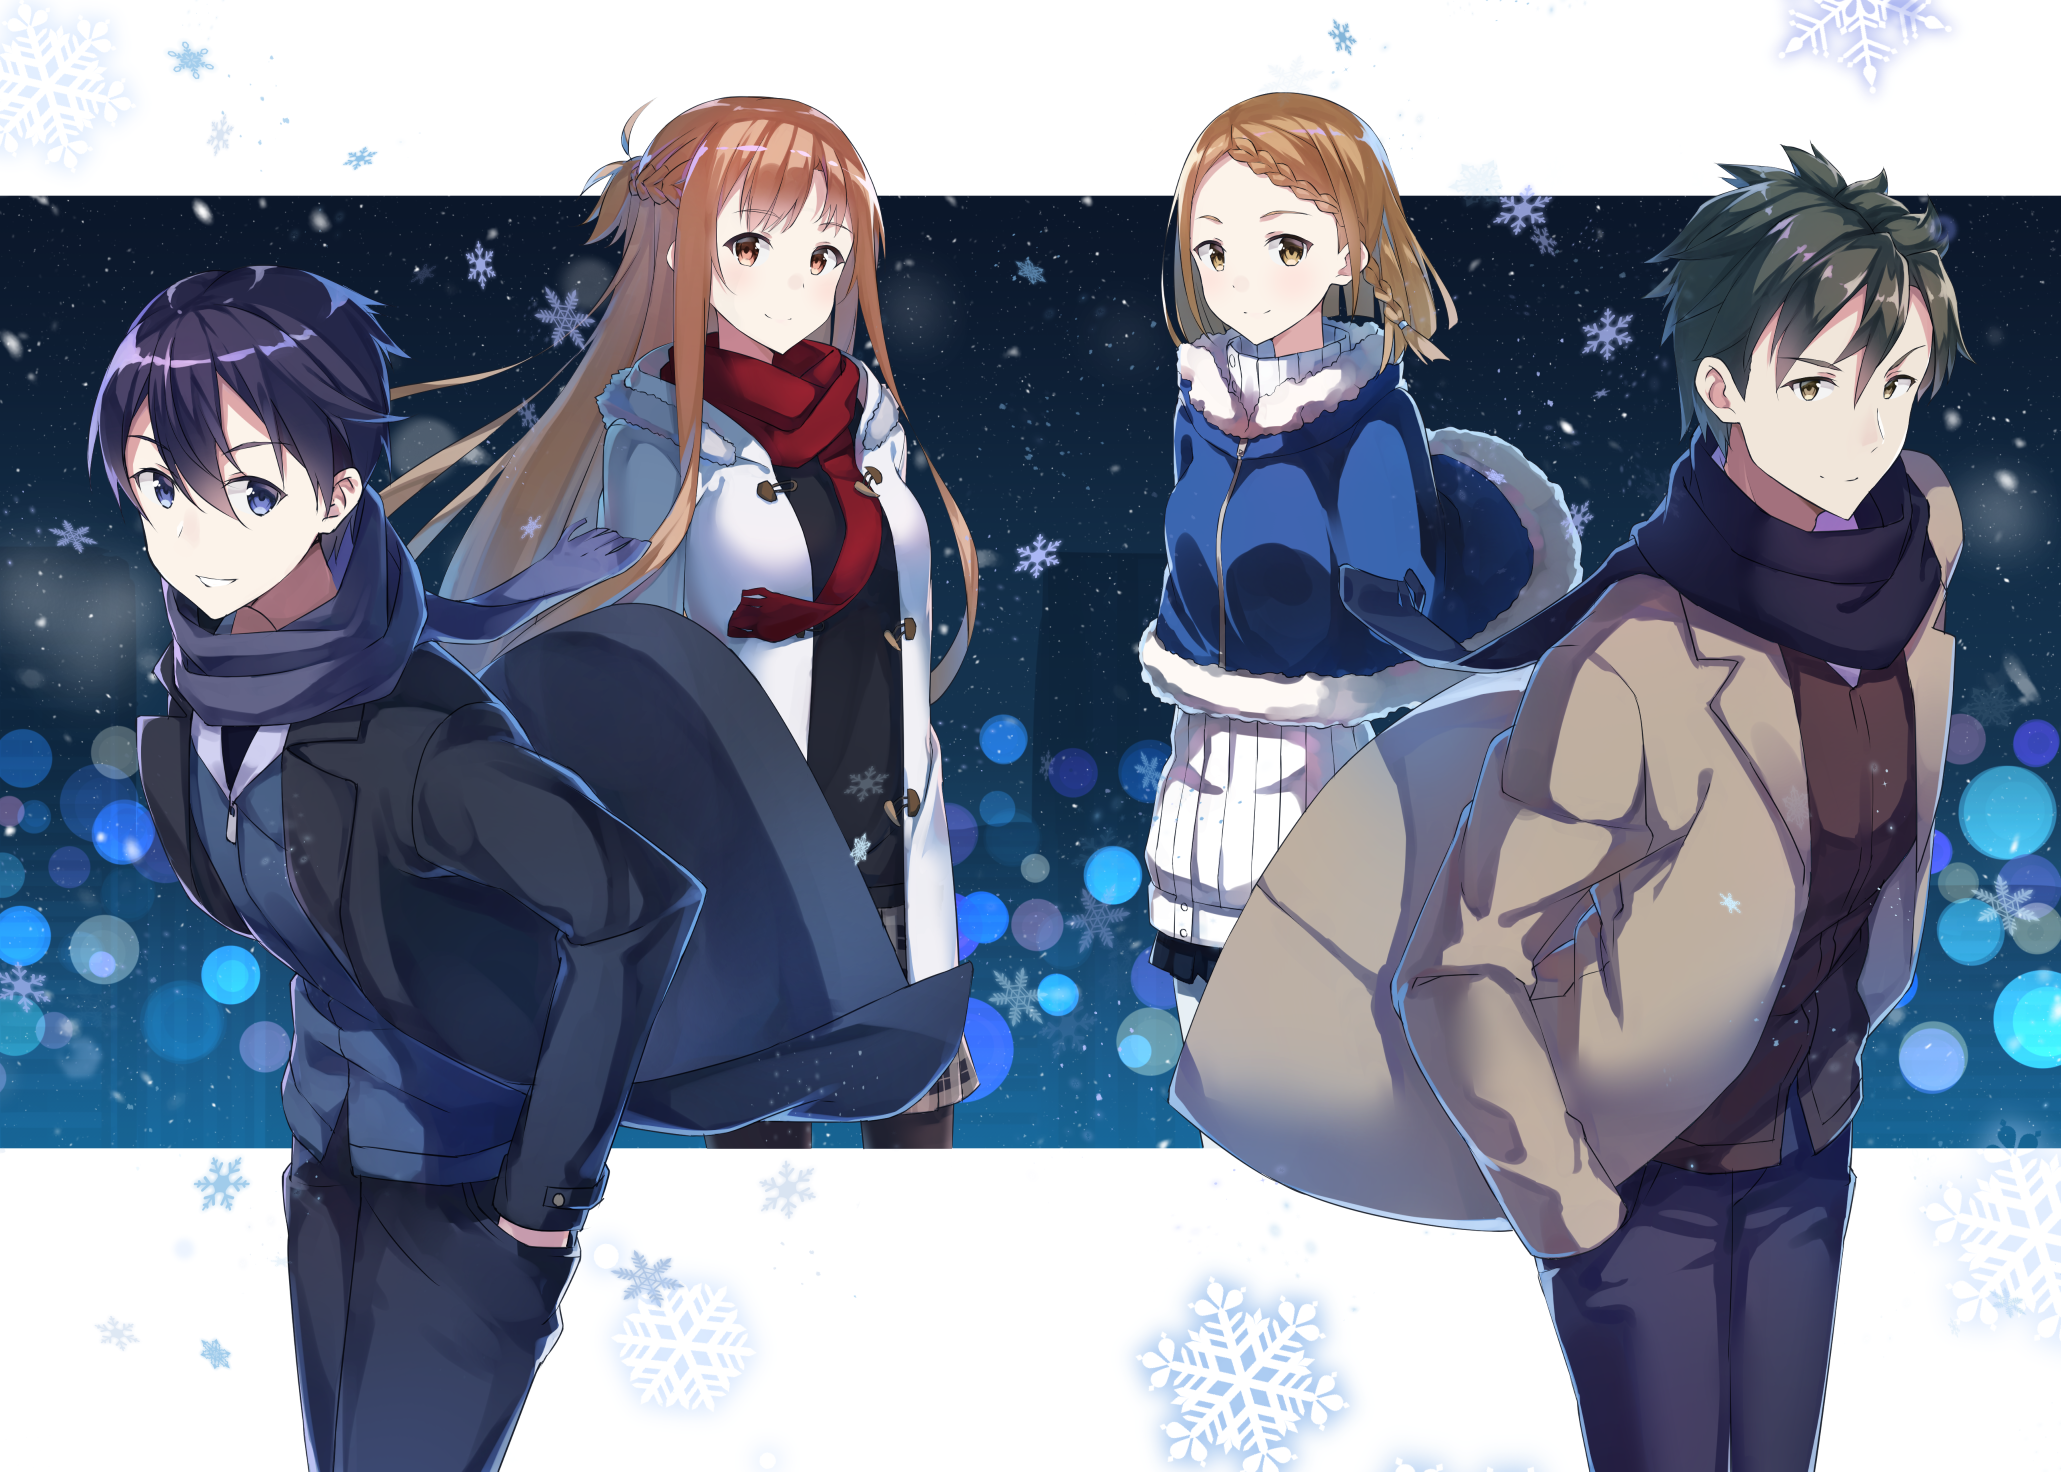 Anime Sword Art Online Movie: Ordinal Scale HD Wallpaper | Background Image